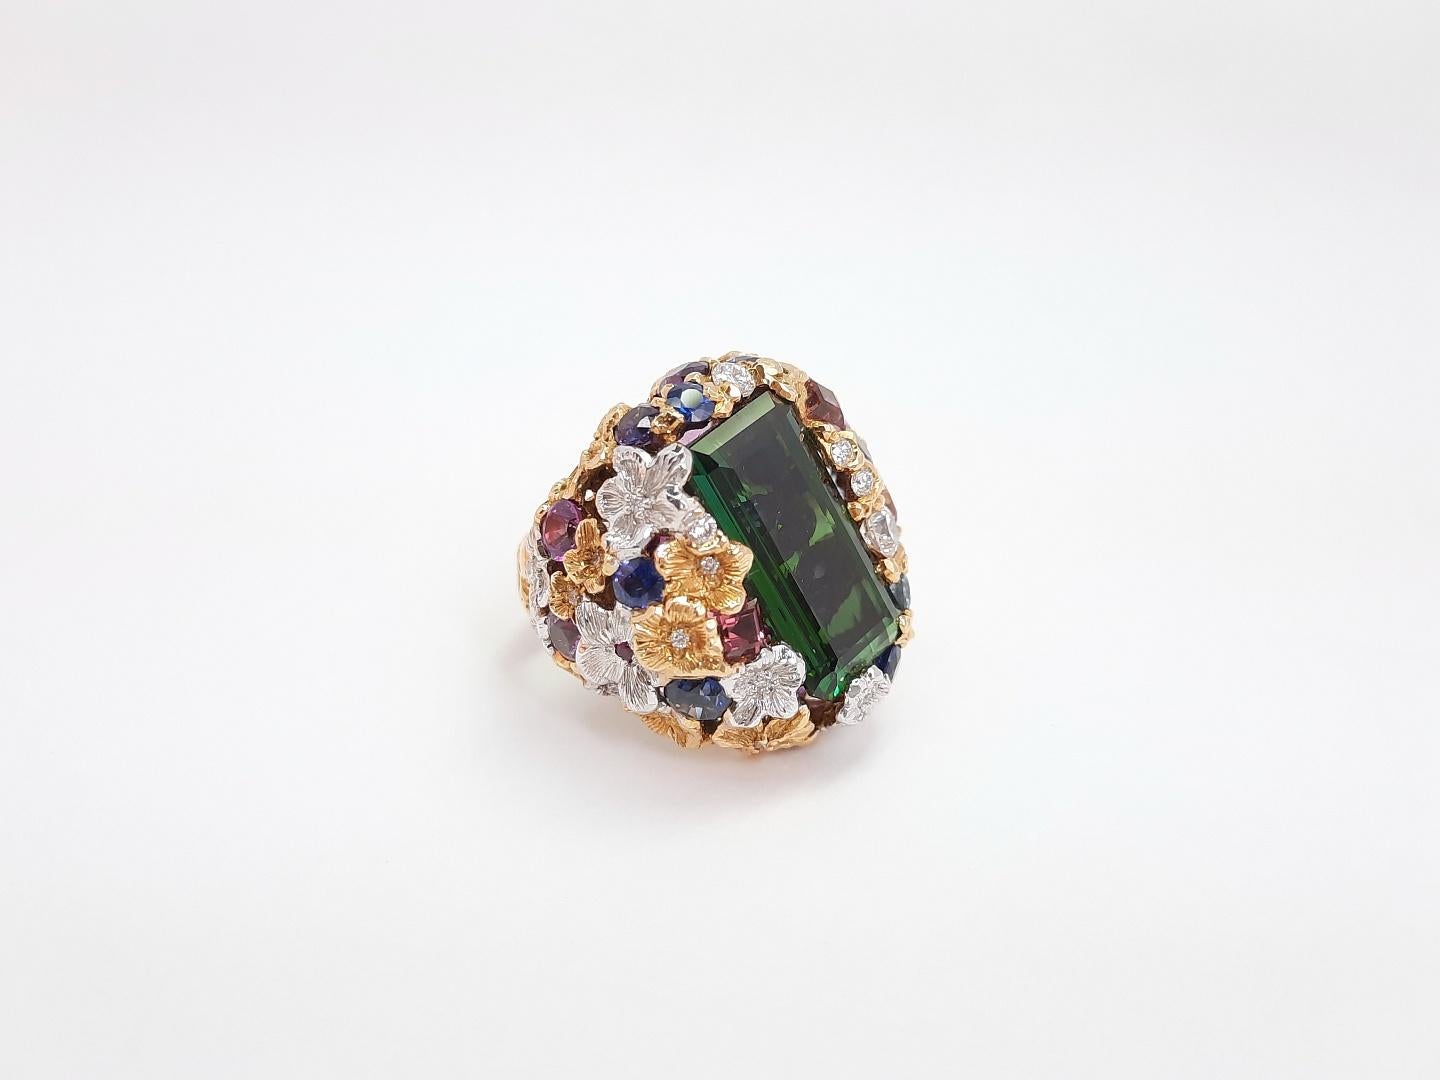 Inspired by Impressionism, Viktor Moiseikin has created a blooming flower ring in a tridimensional manner. Trembling flowers and the sweet fragrance of coming ripe fruits are embodied in gems and metals. Inside the designed flower petals ravished